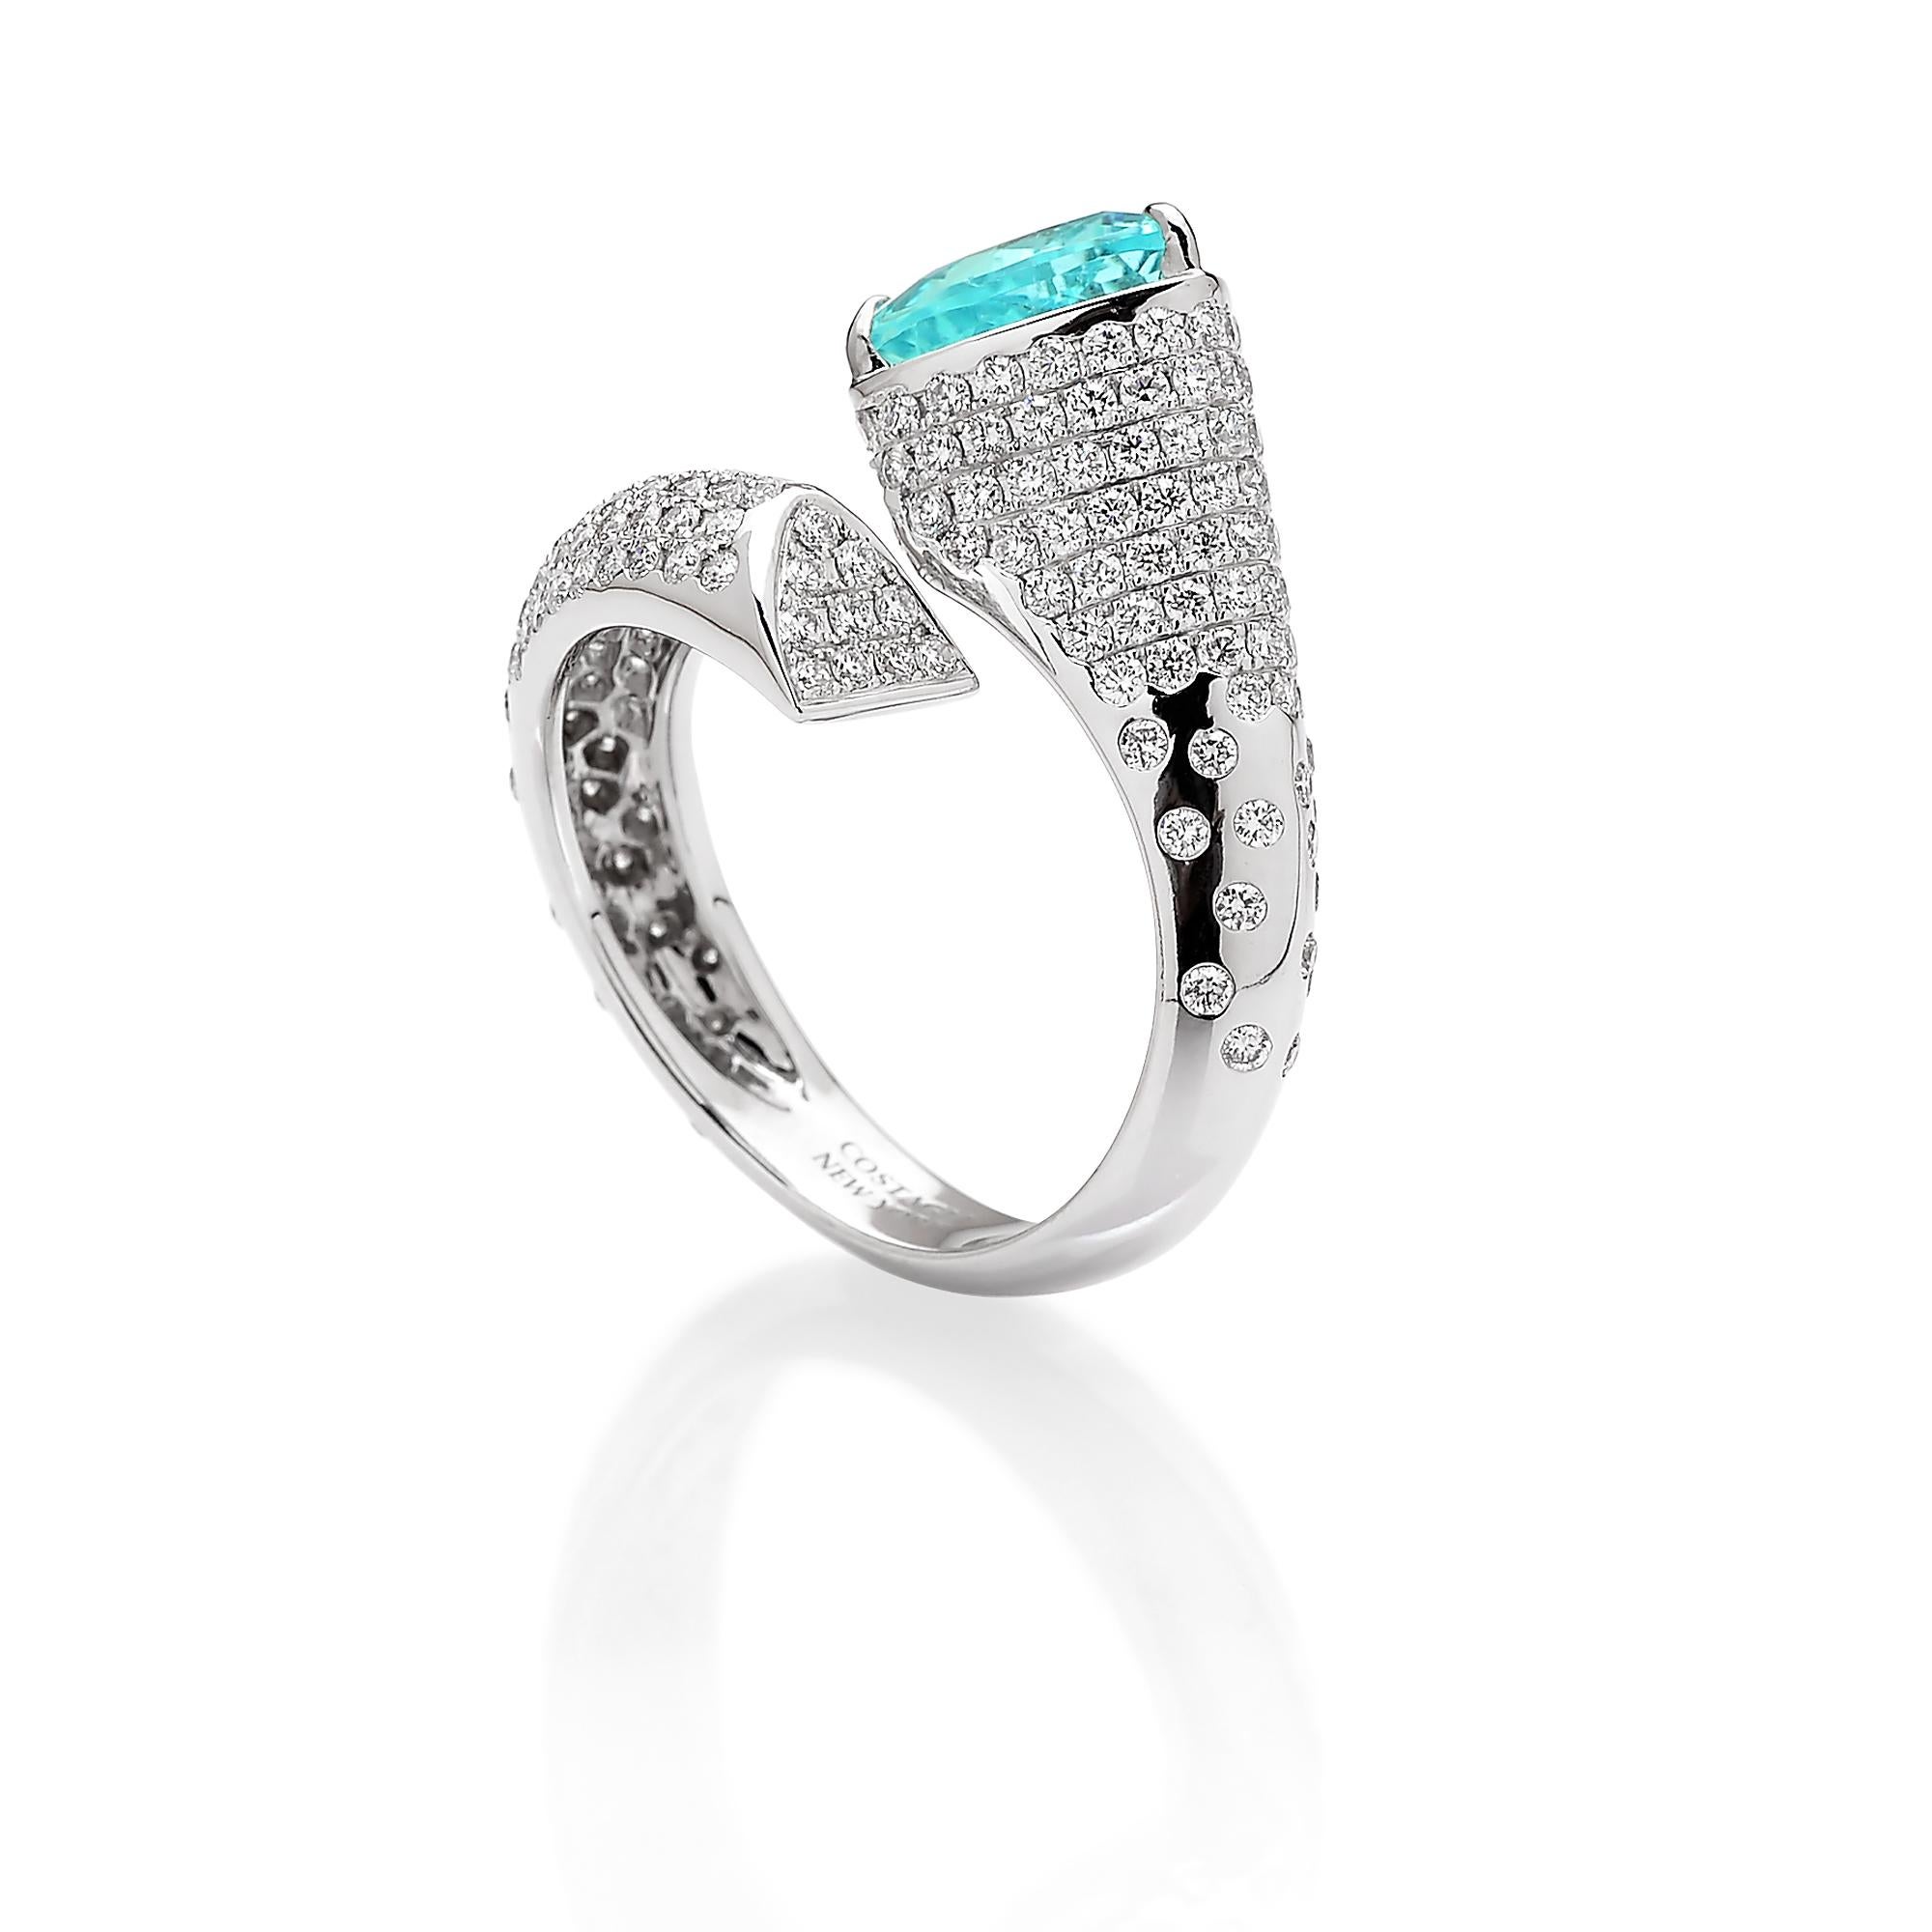 One of a kind trillion shape paraiba-type tourmaline ring set in 18kt white gold with pave-set round, brilliant diamonds.

This one of a kind paraiba-type tourmaline ring features a bold, modern setting for the vibrant, timeless paraiba-type